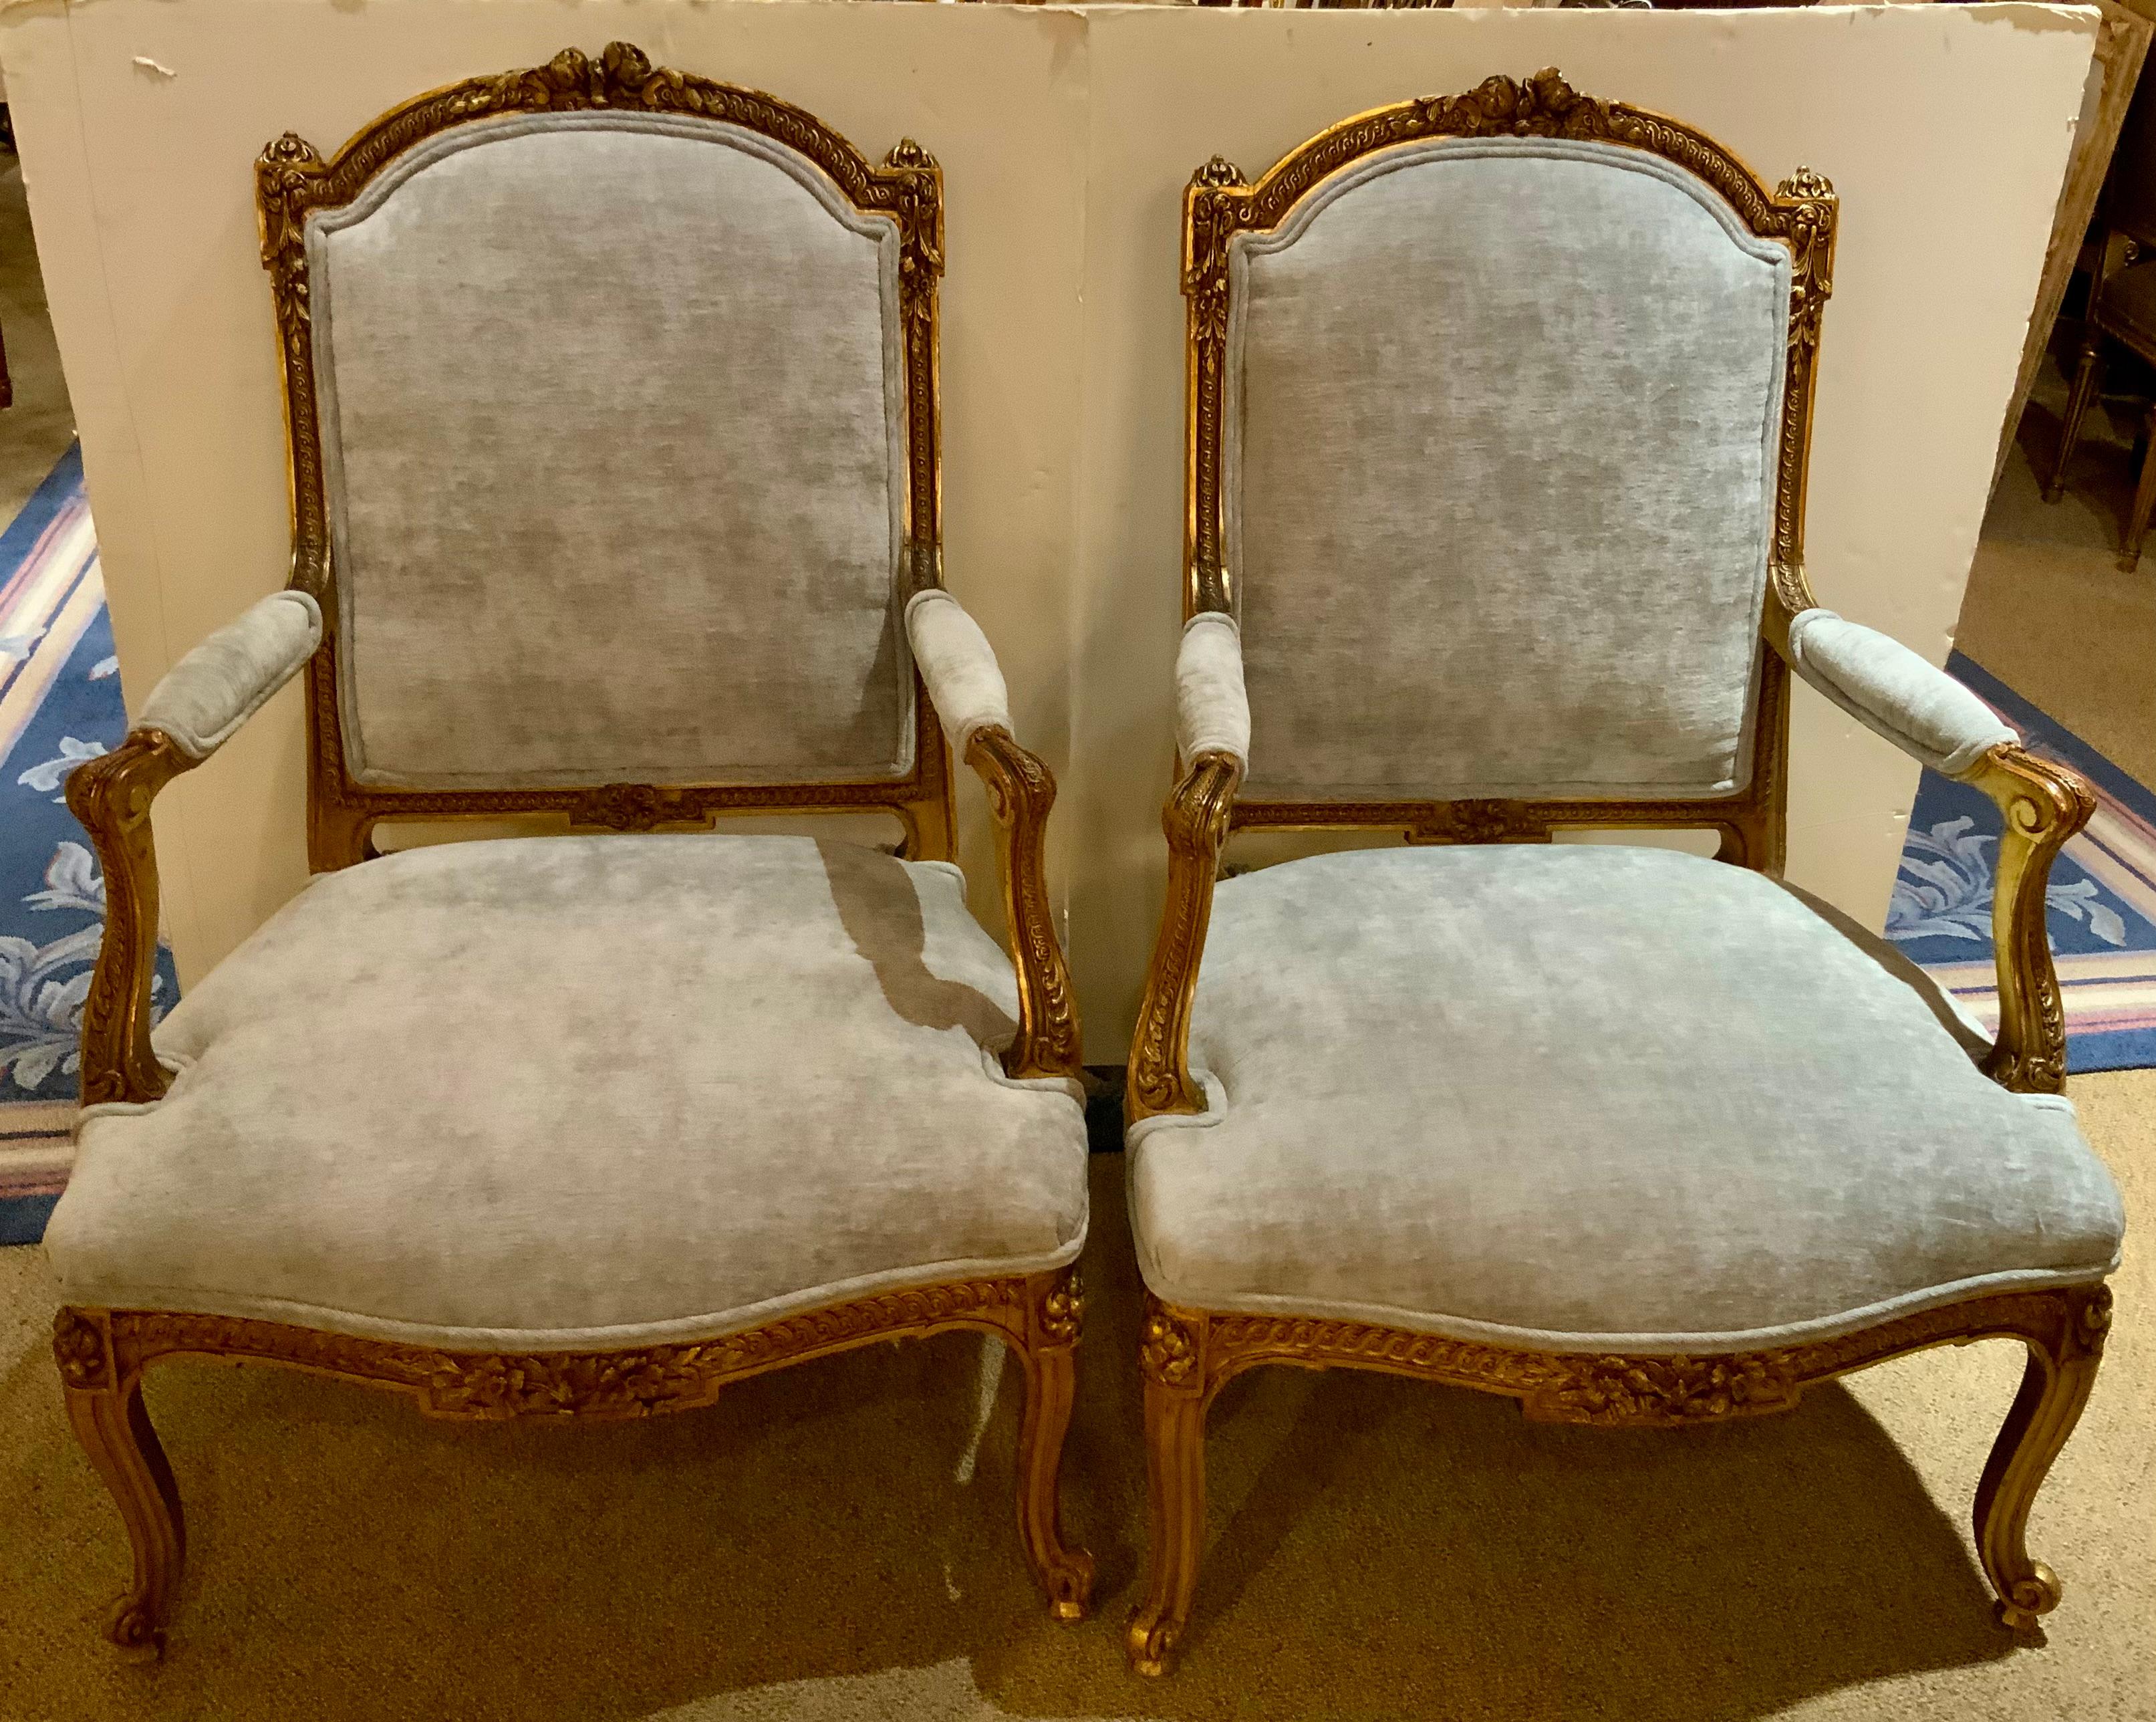 These fine chairs have a domed and padded back surmounted 
By a floral crest, joined by padded arms to the like seat, raised
Above a floral guilloche-carved apron on molded cabriole legs ending in scrolled toes, covered in a new fabric in pale